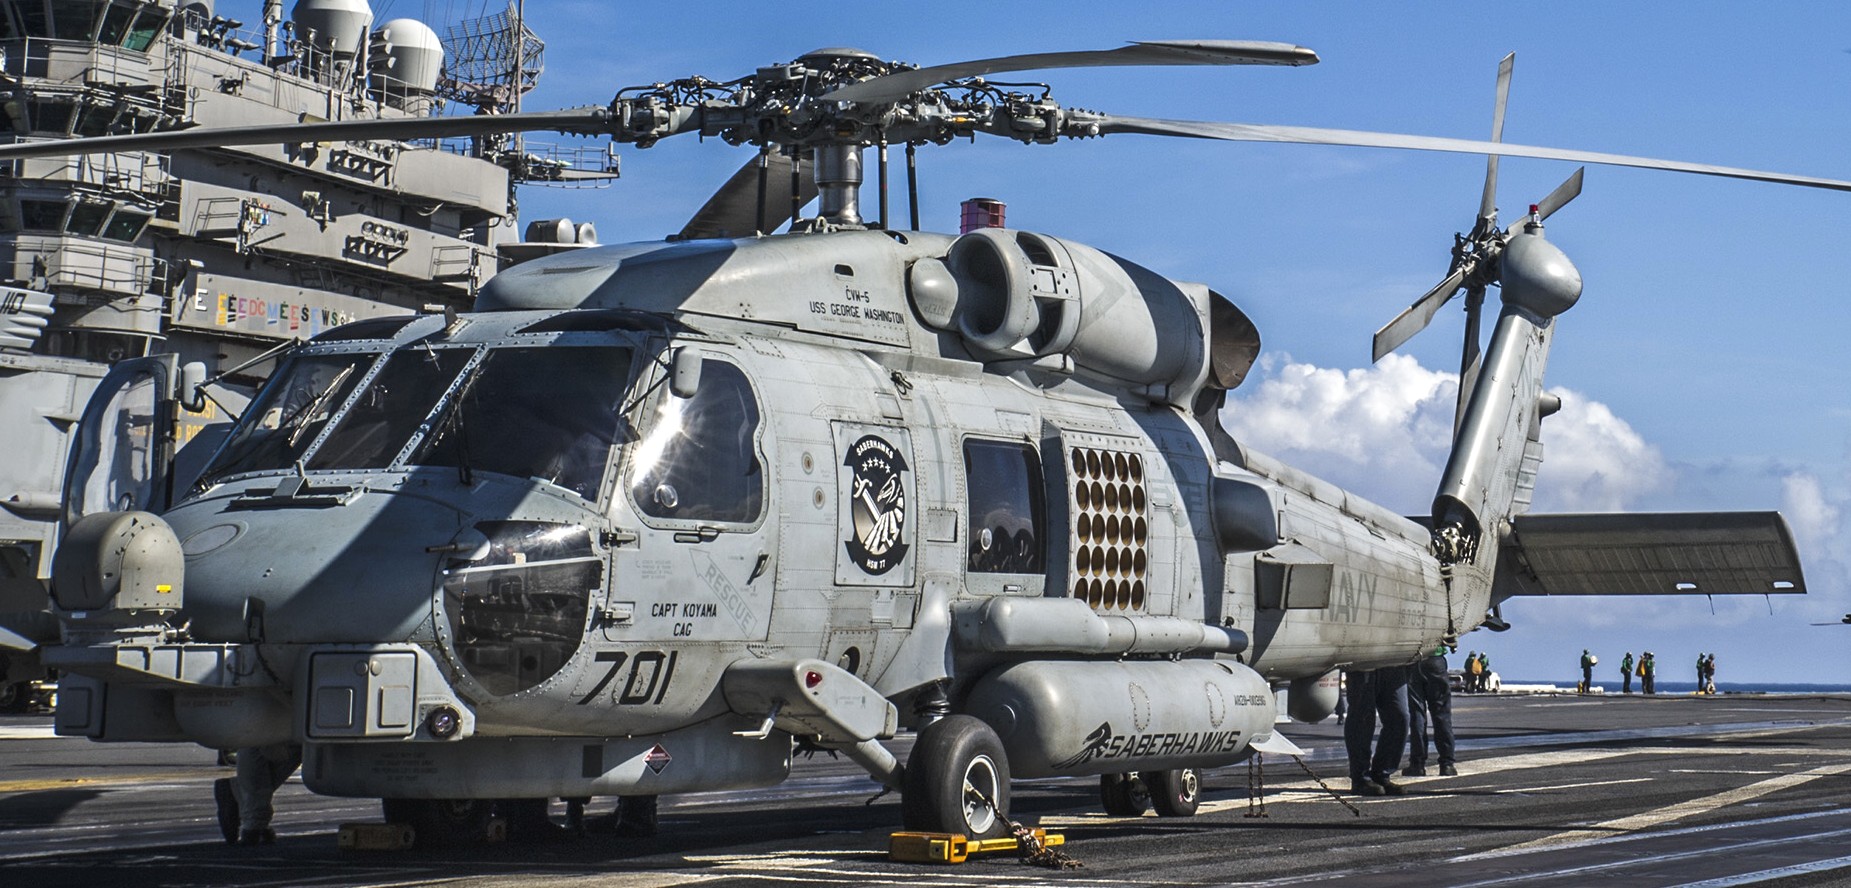 hsm-77 saberhawks helicopter maritime strike squadron us navy 2014 11